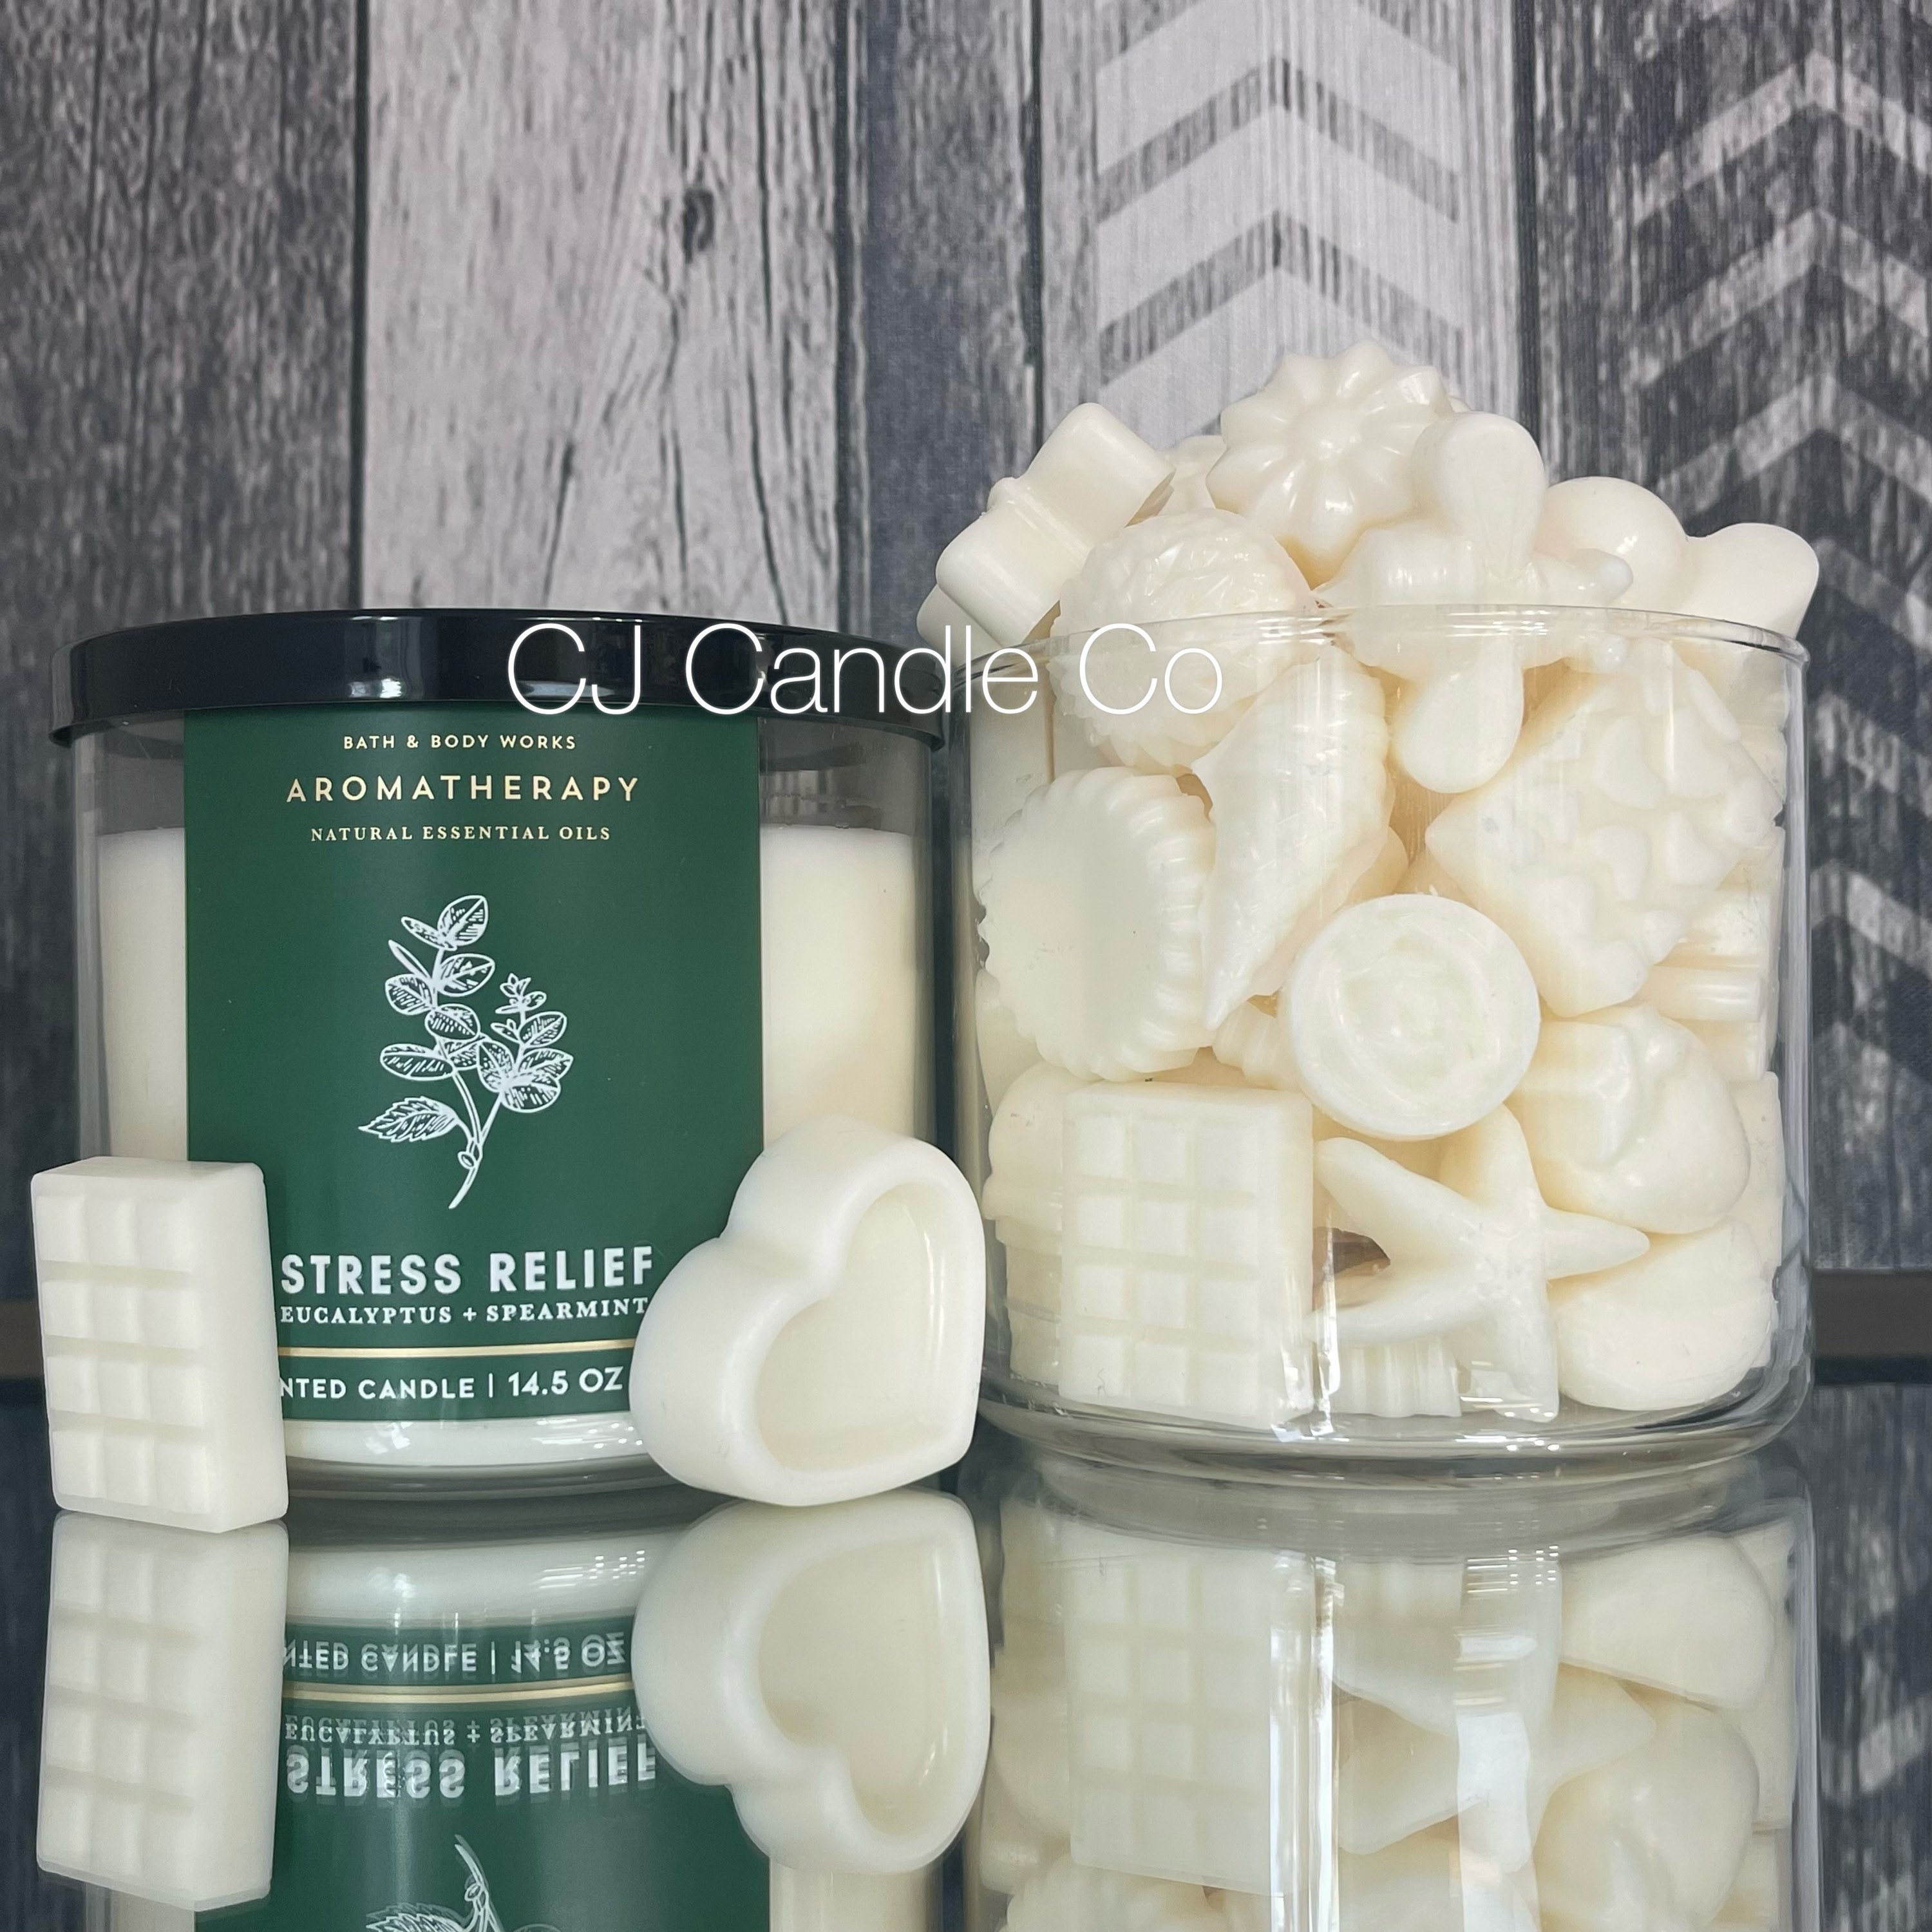 Mahogany Teakwood 3 Bath & Body Works Candle Wax Melts Snap Bars Gift Set  BBW Wax Meltsperfect Gift for Mom, Sister, Valentines Day -  Norway